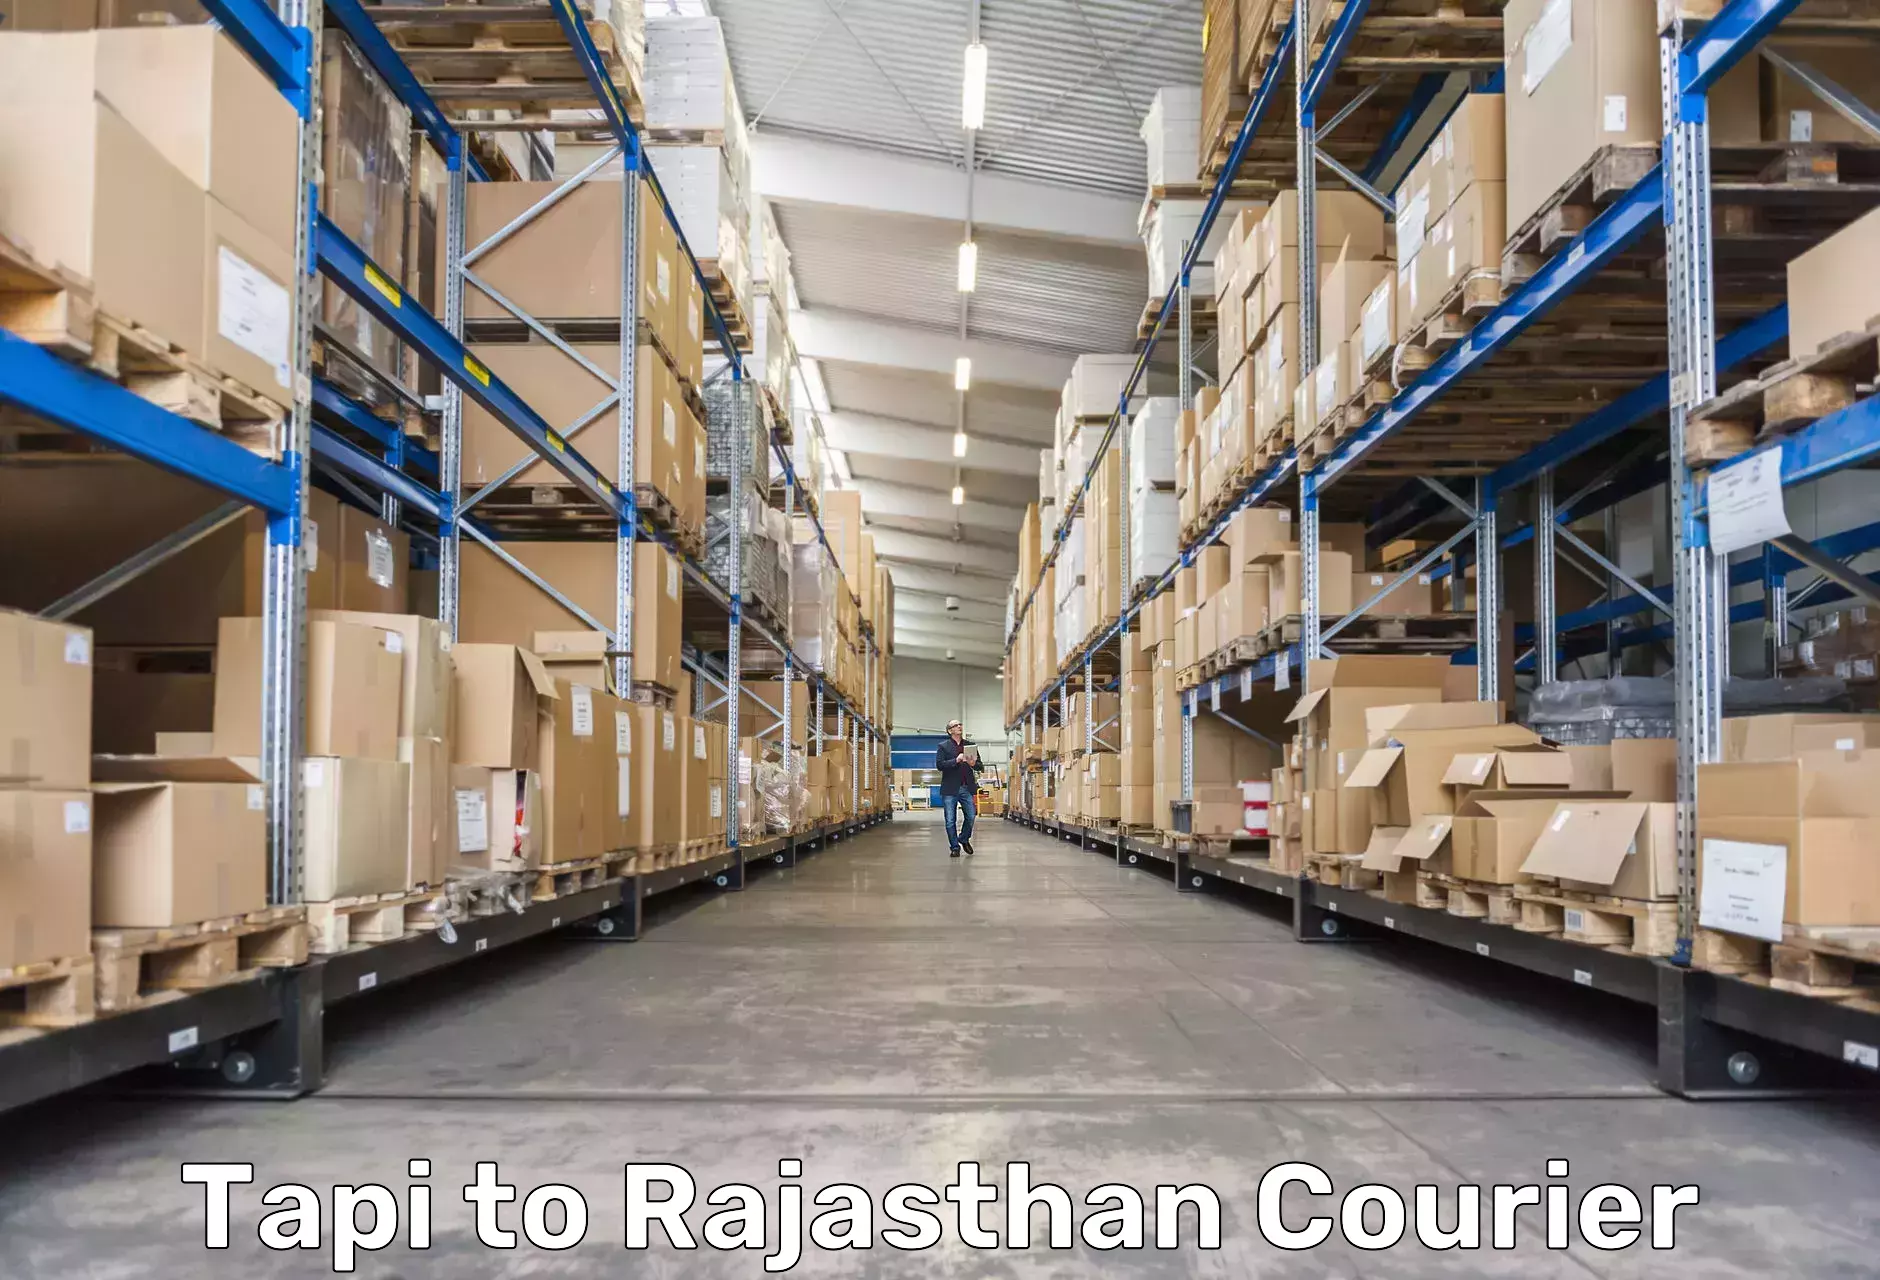 Sustainable shipping practices in Tapi to Rajasthan